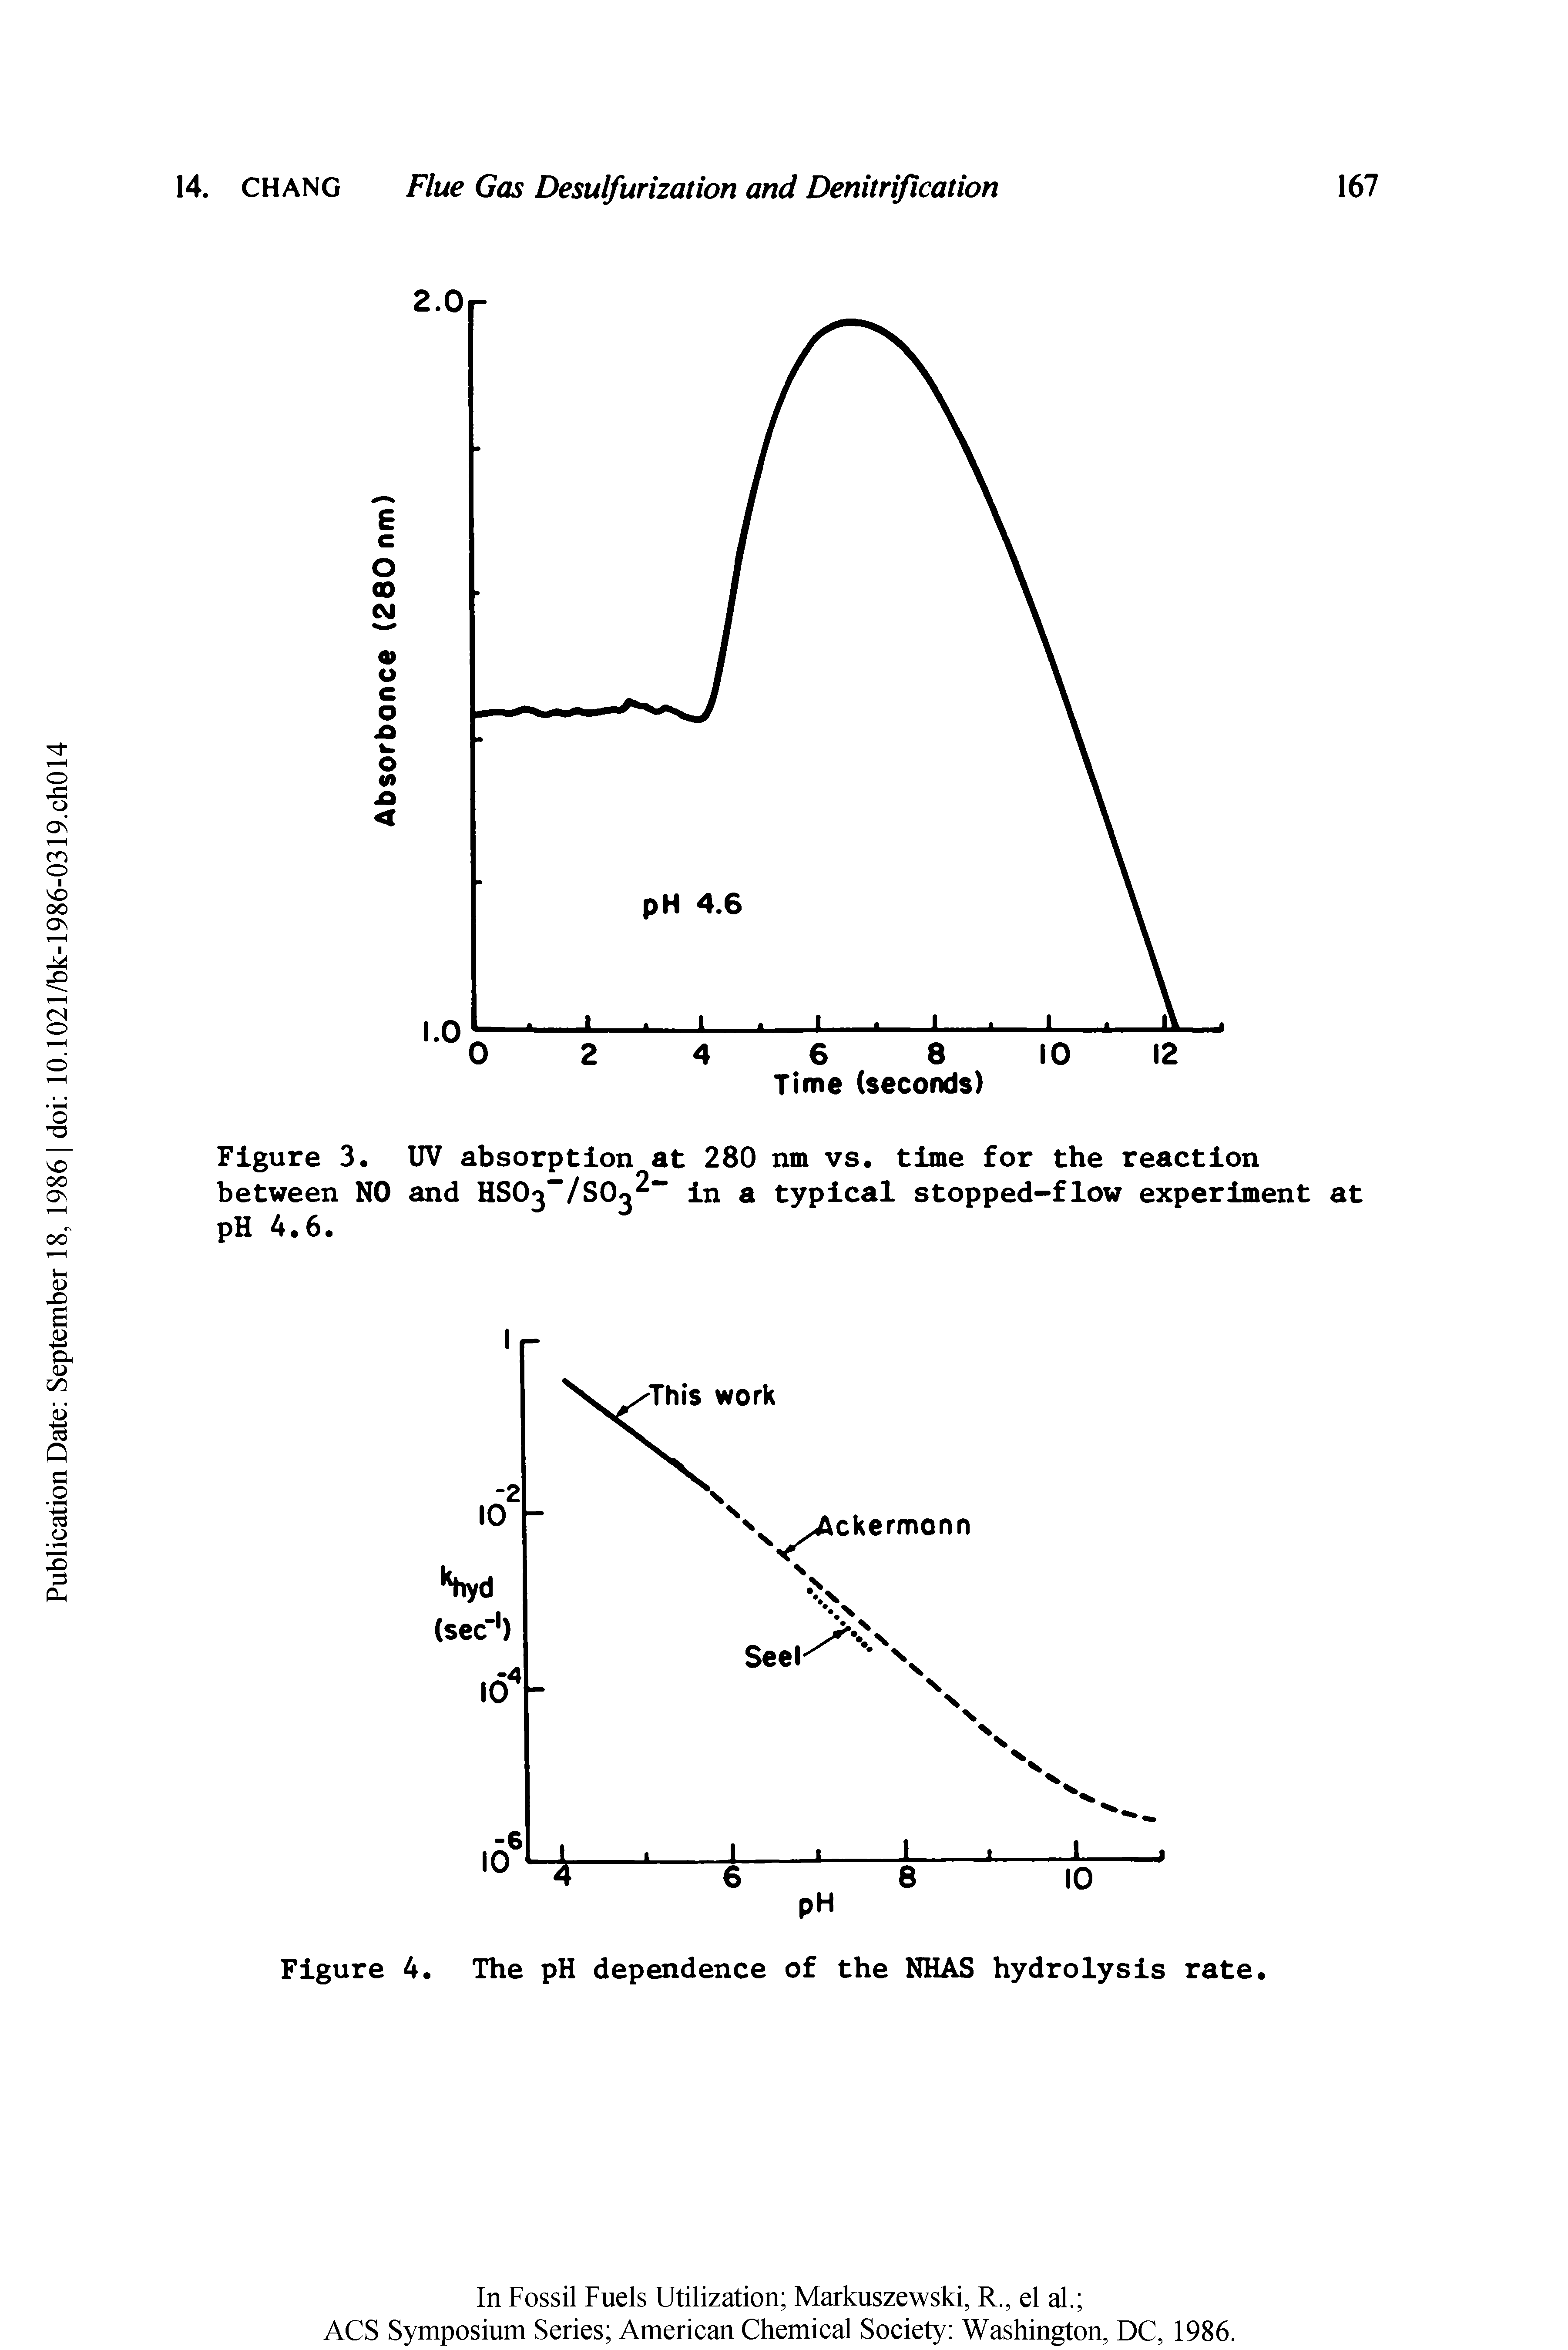 Figure 3. UV absorption at 280 nm vs. time for the reaction between NO and HS03"/S03 in a typical stopped-flow experiment at pH 4.6.